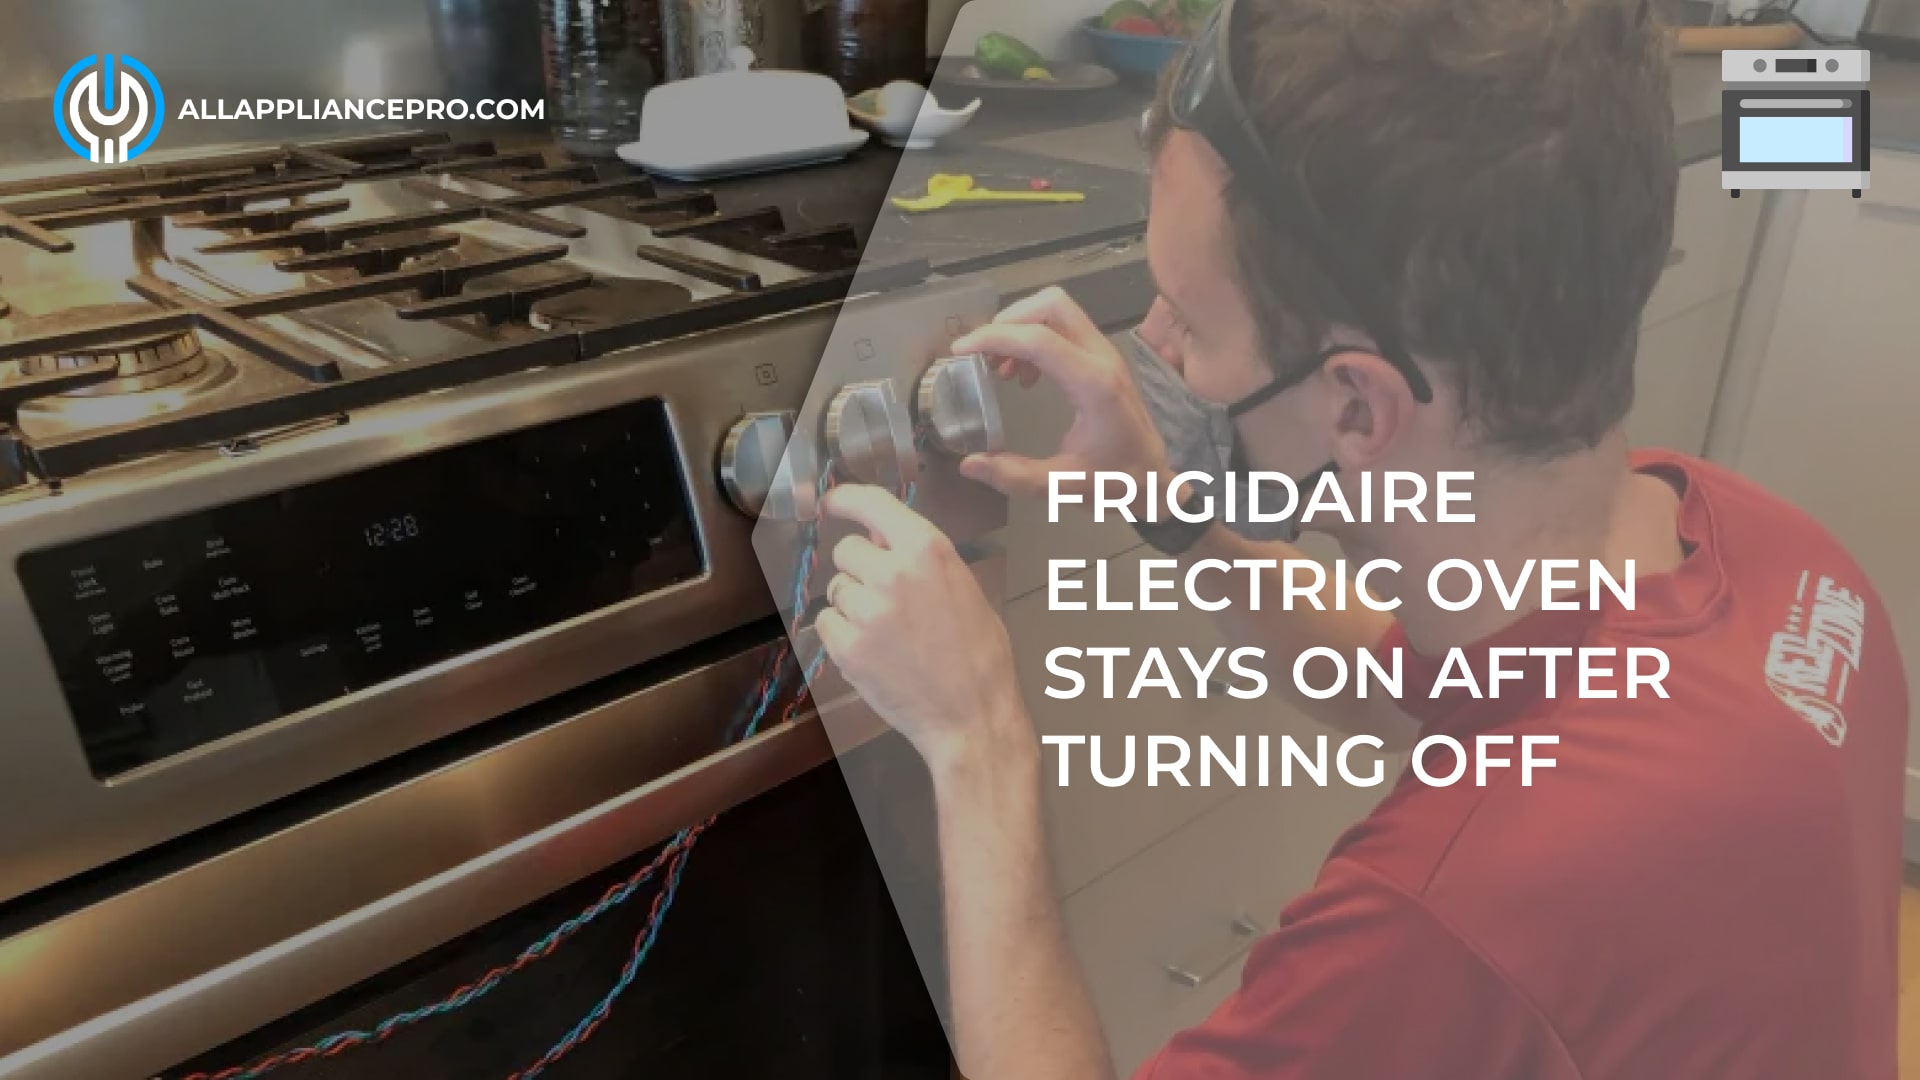 Frigidaire Electric Oven Stays On After Turning Off